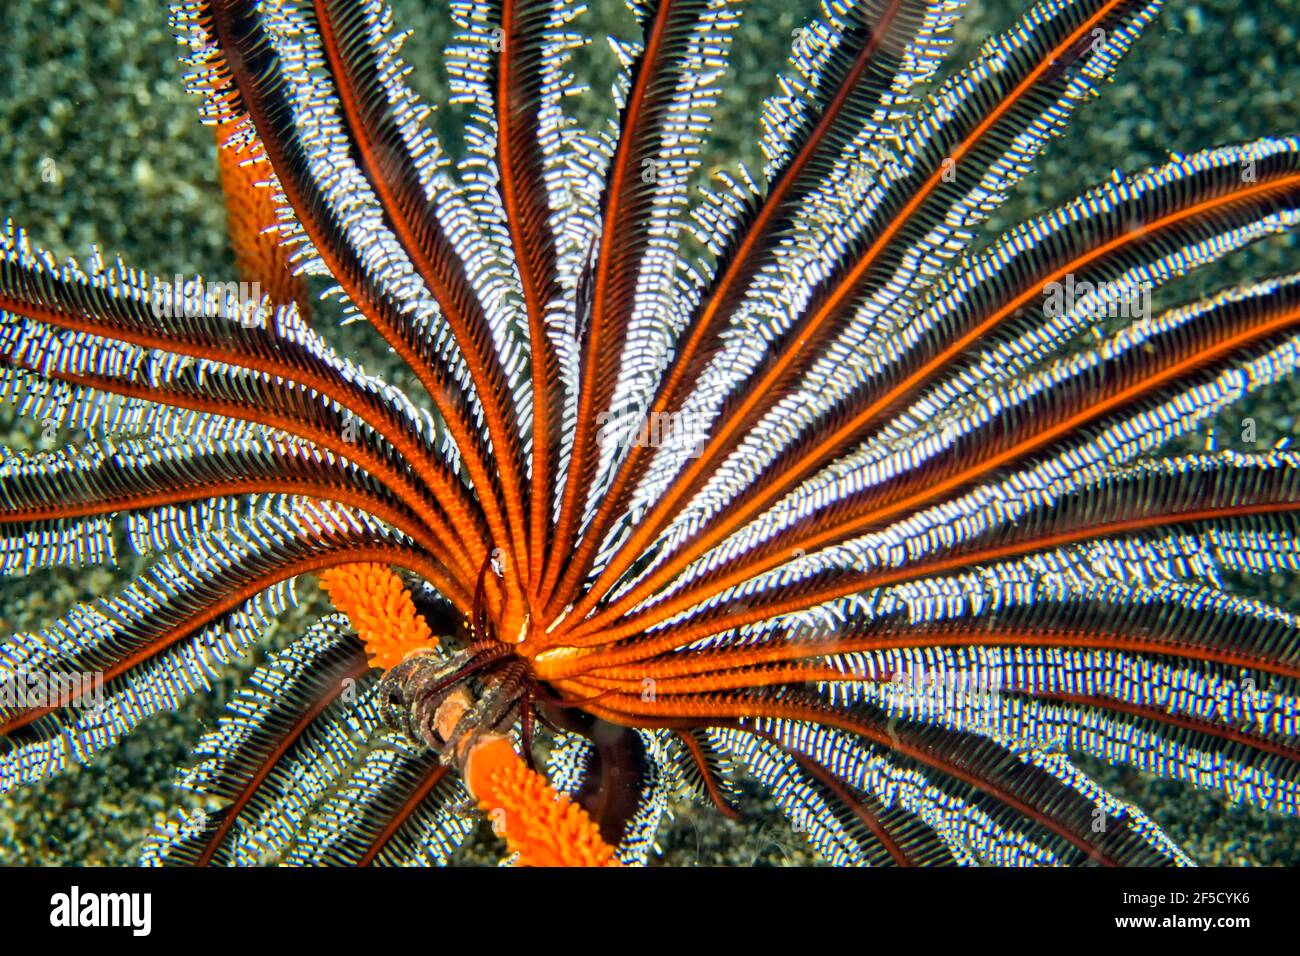 Underwater Crinoid Feather Star High Resolution Stock Photography And